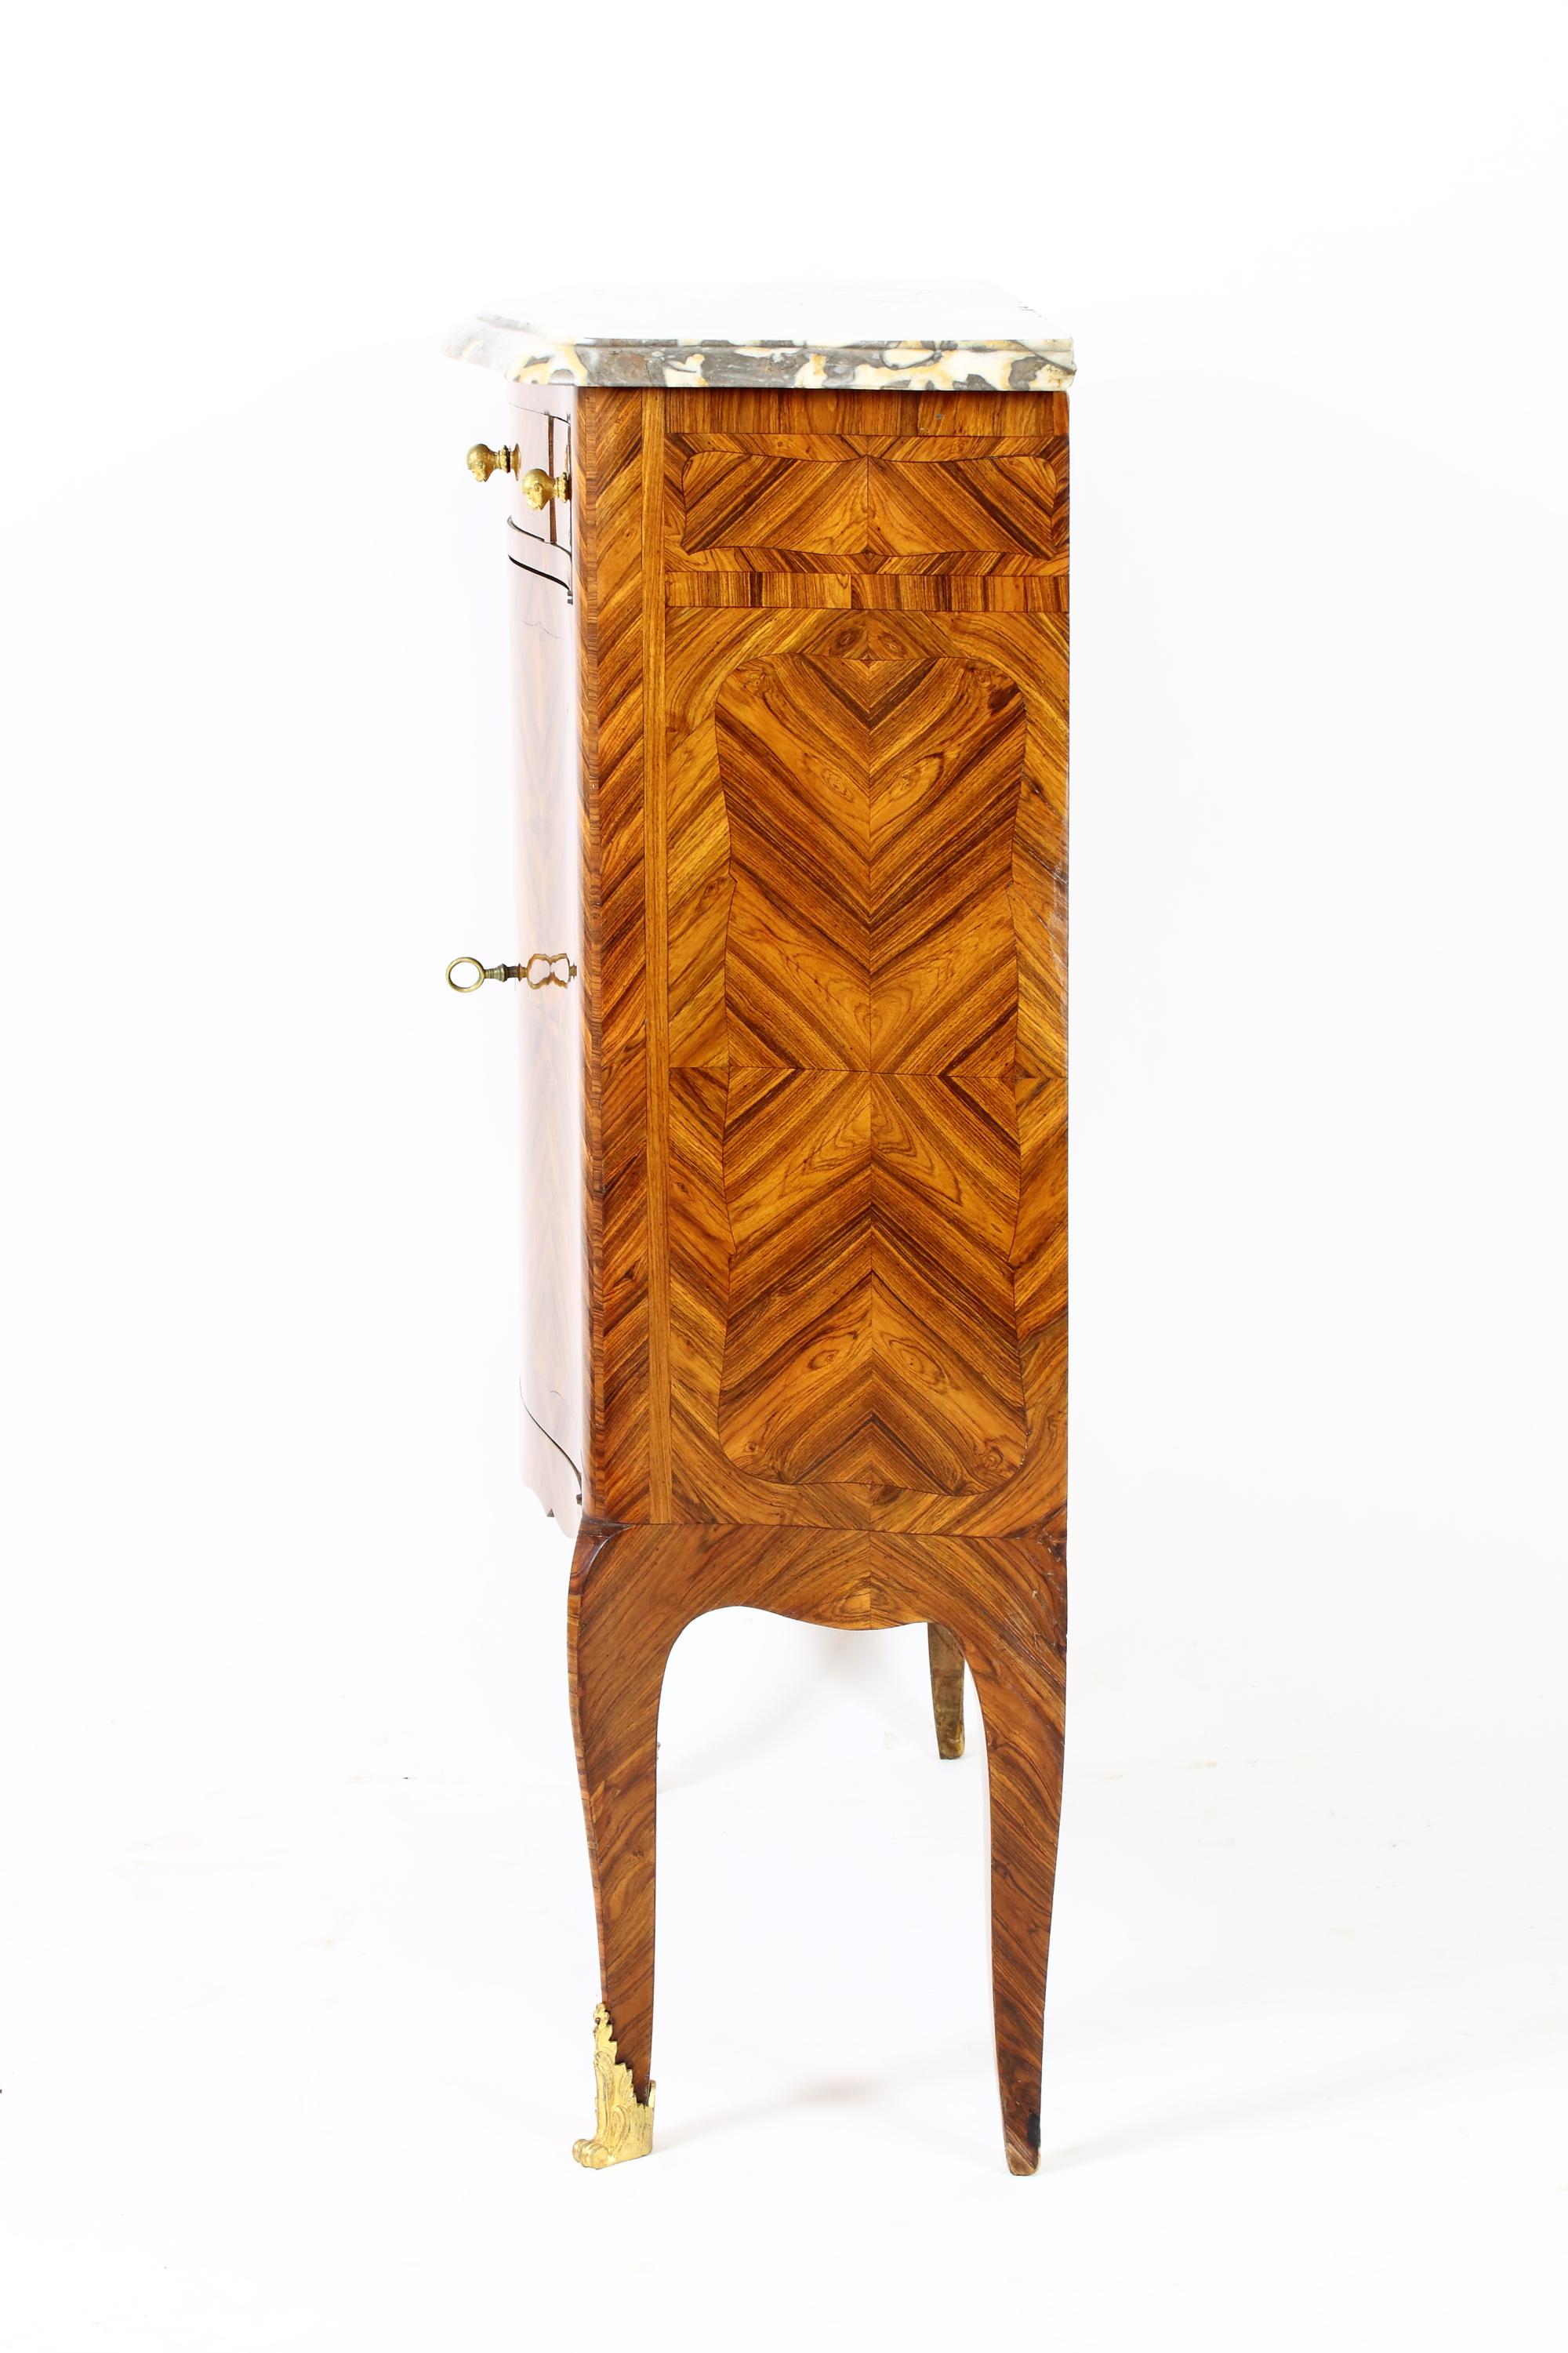 Small 19th Century French Marquetry NAP III Louis XV Cabinet or Meuble D’appui 4